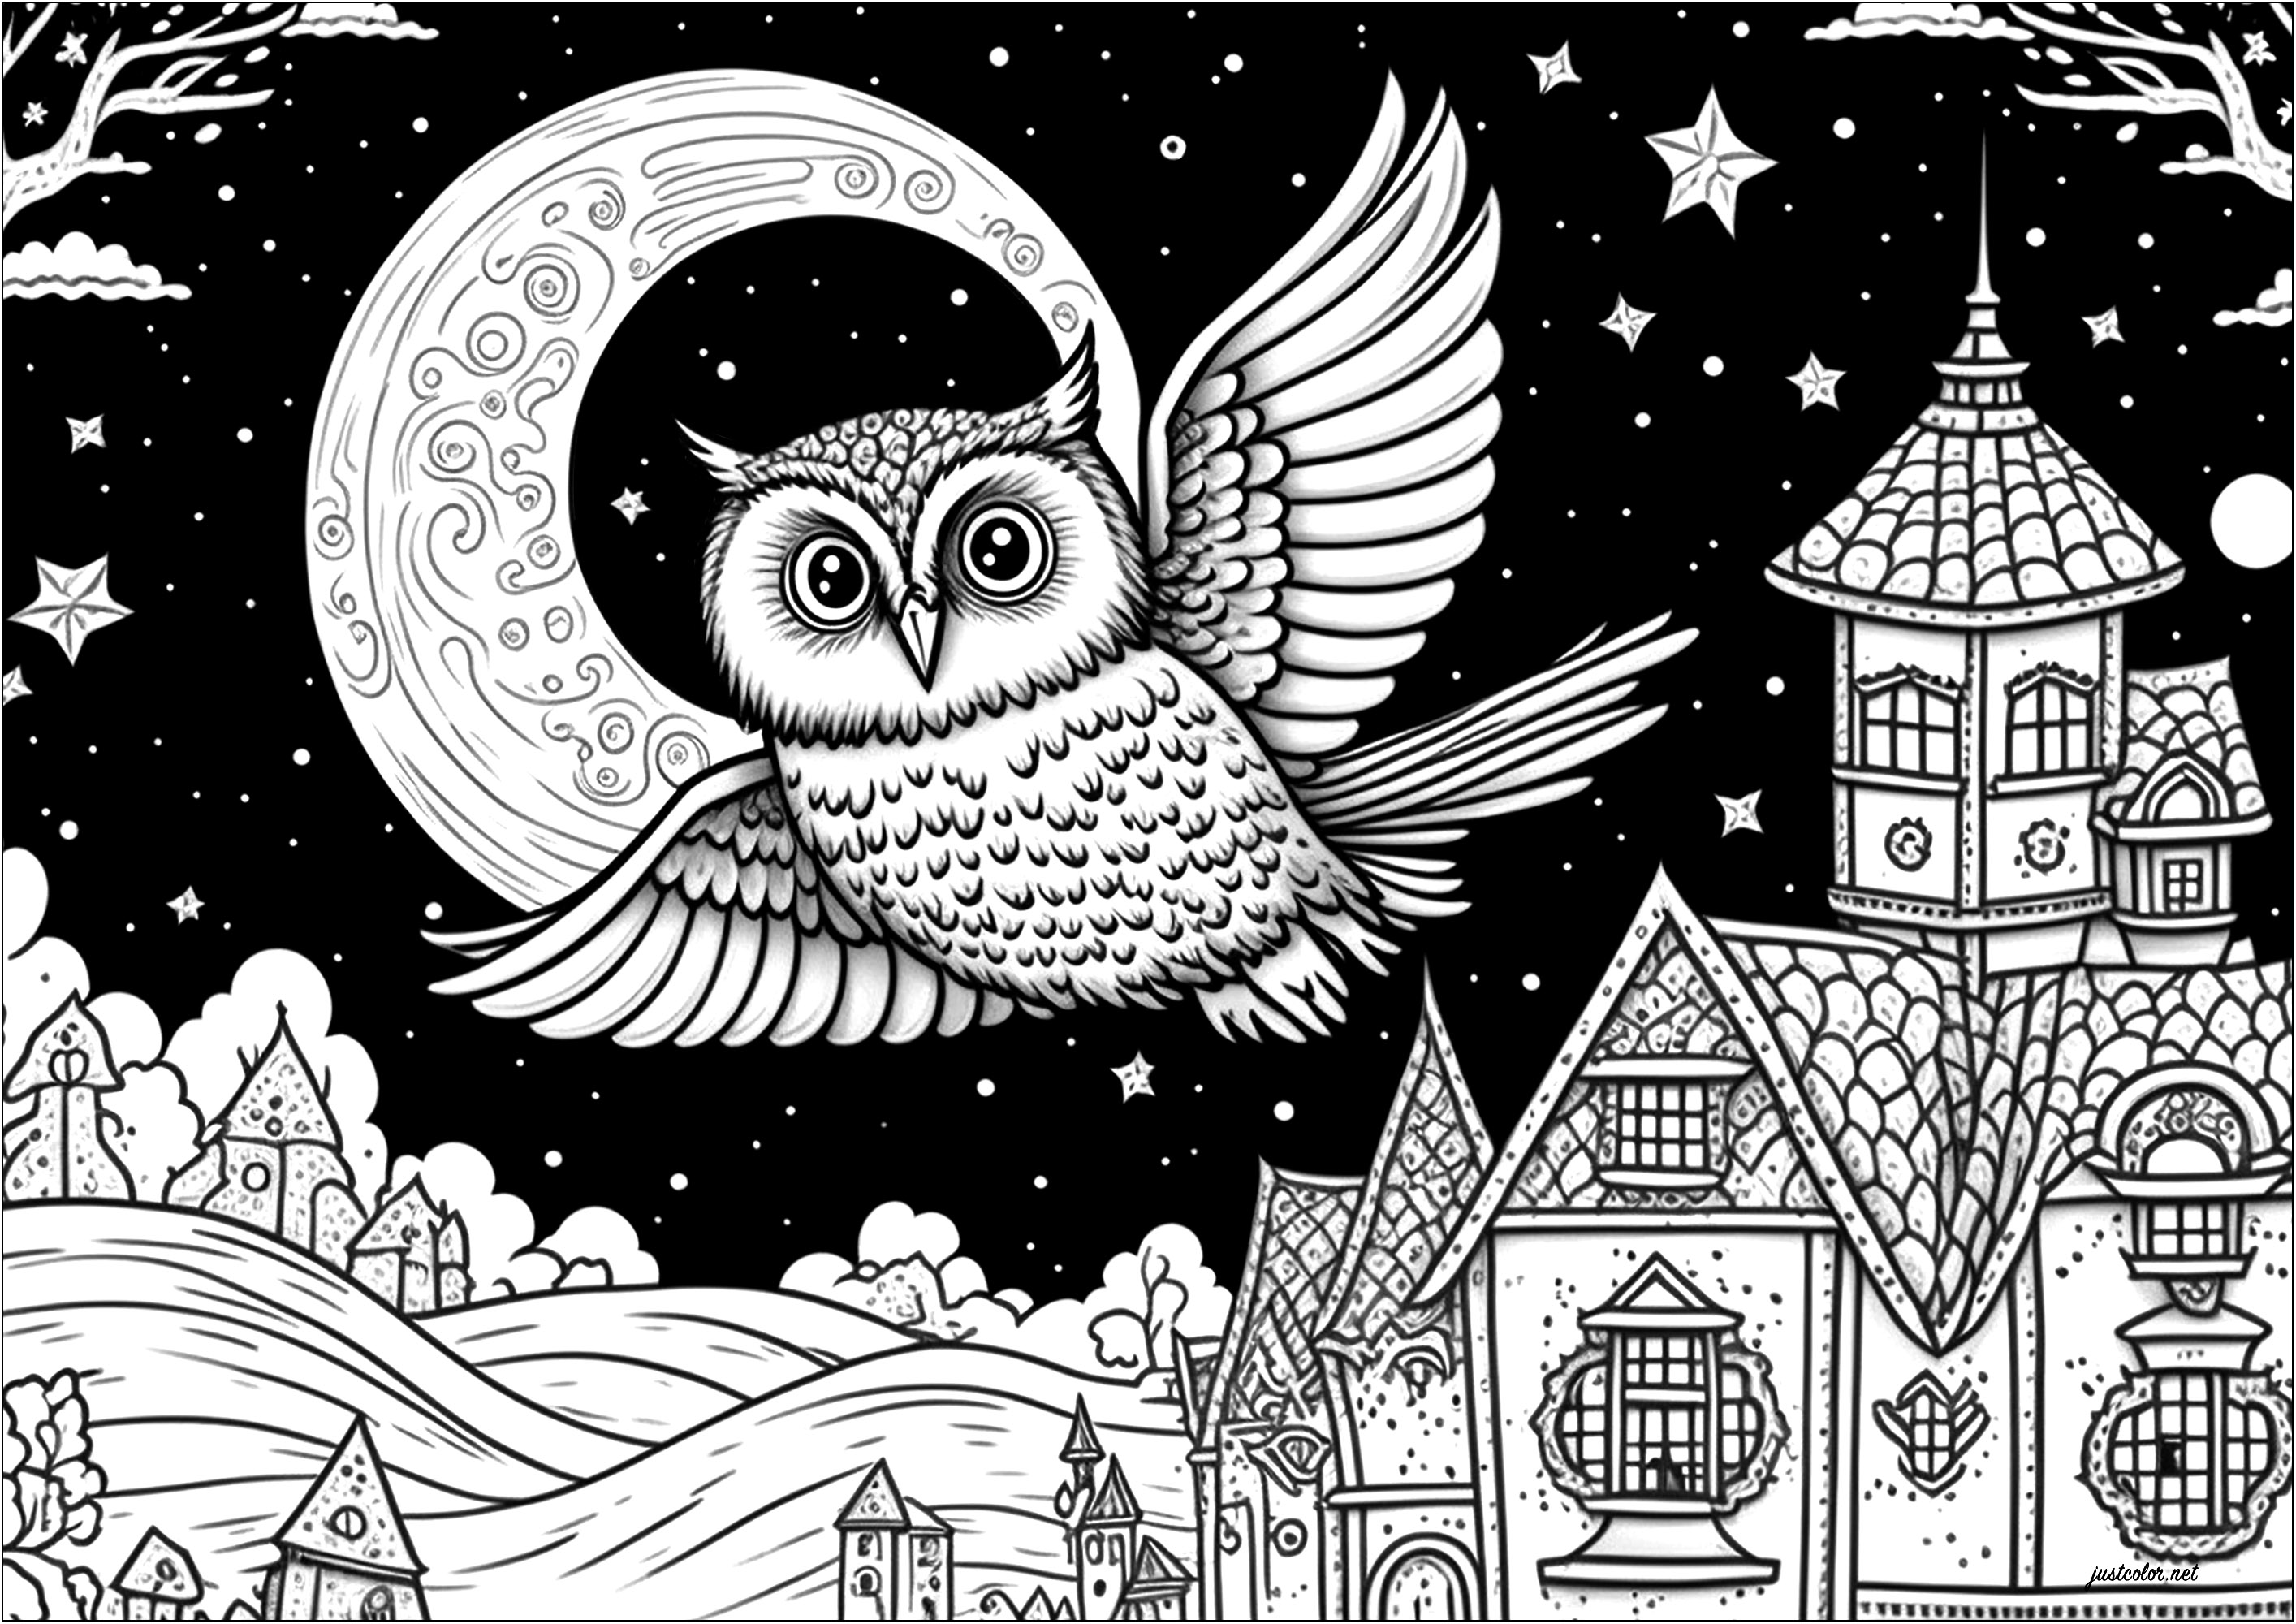 Coloring of an owl during a starry night with full moon. This coloring page is a real invitation to magic and poetry.
